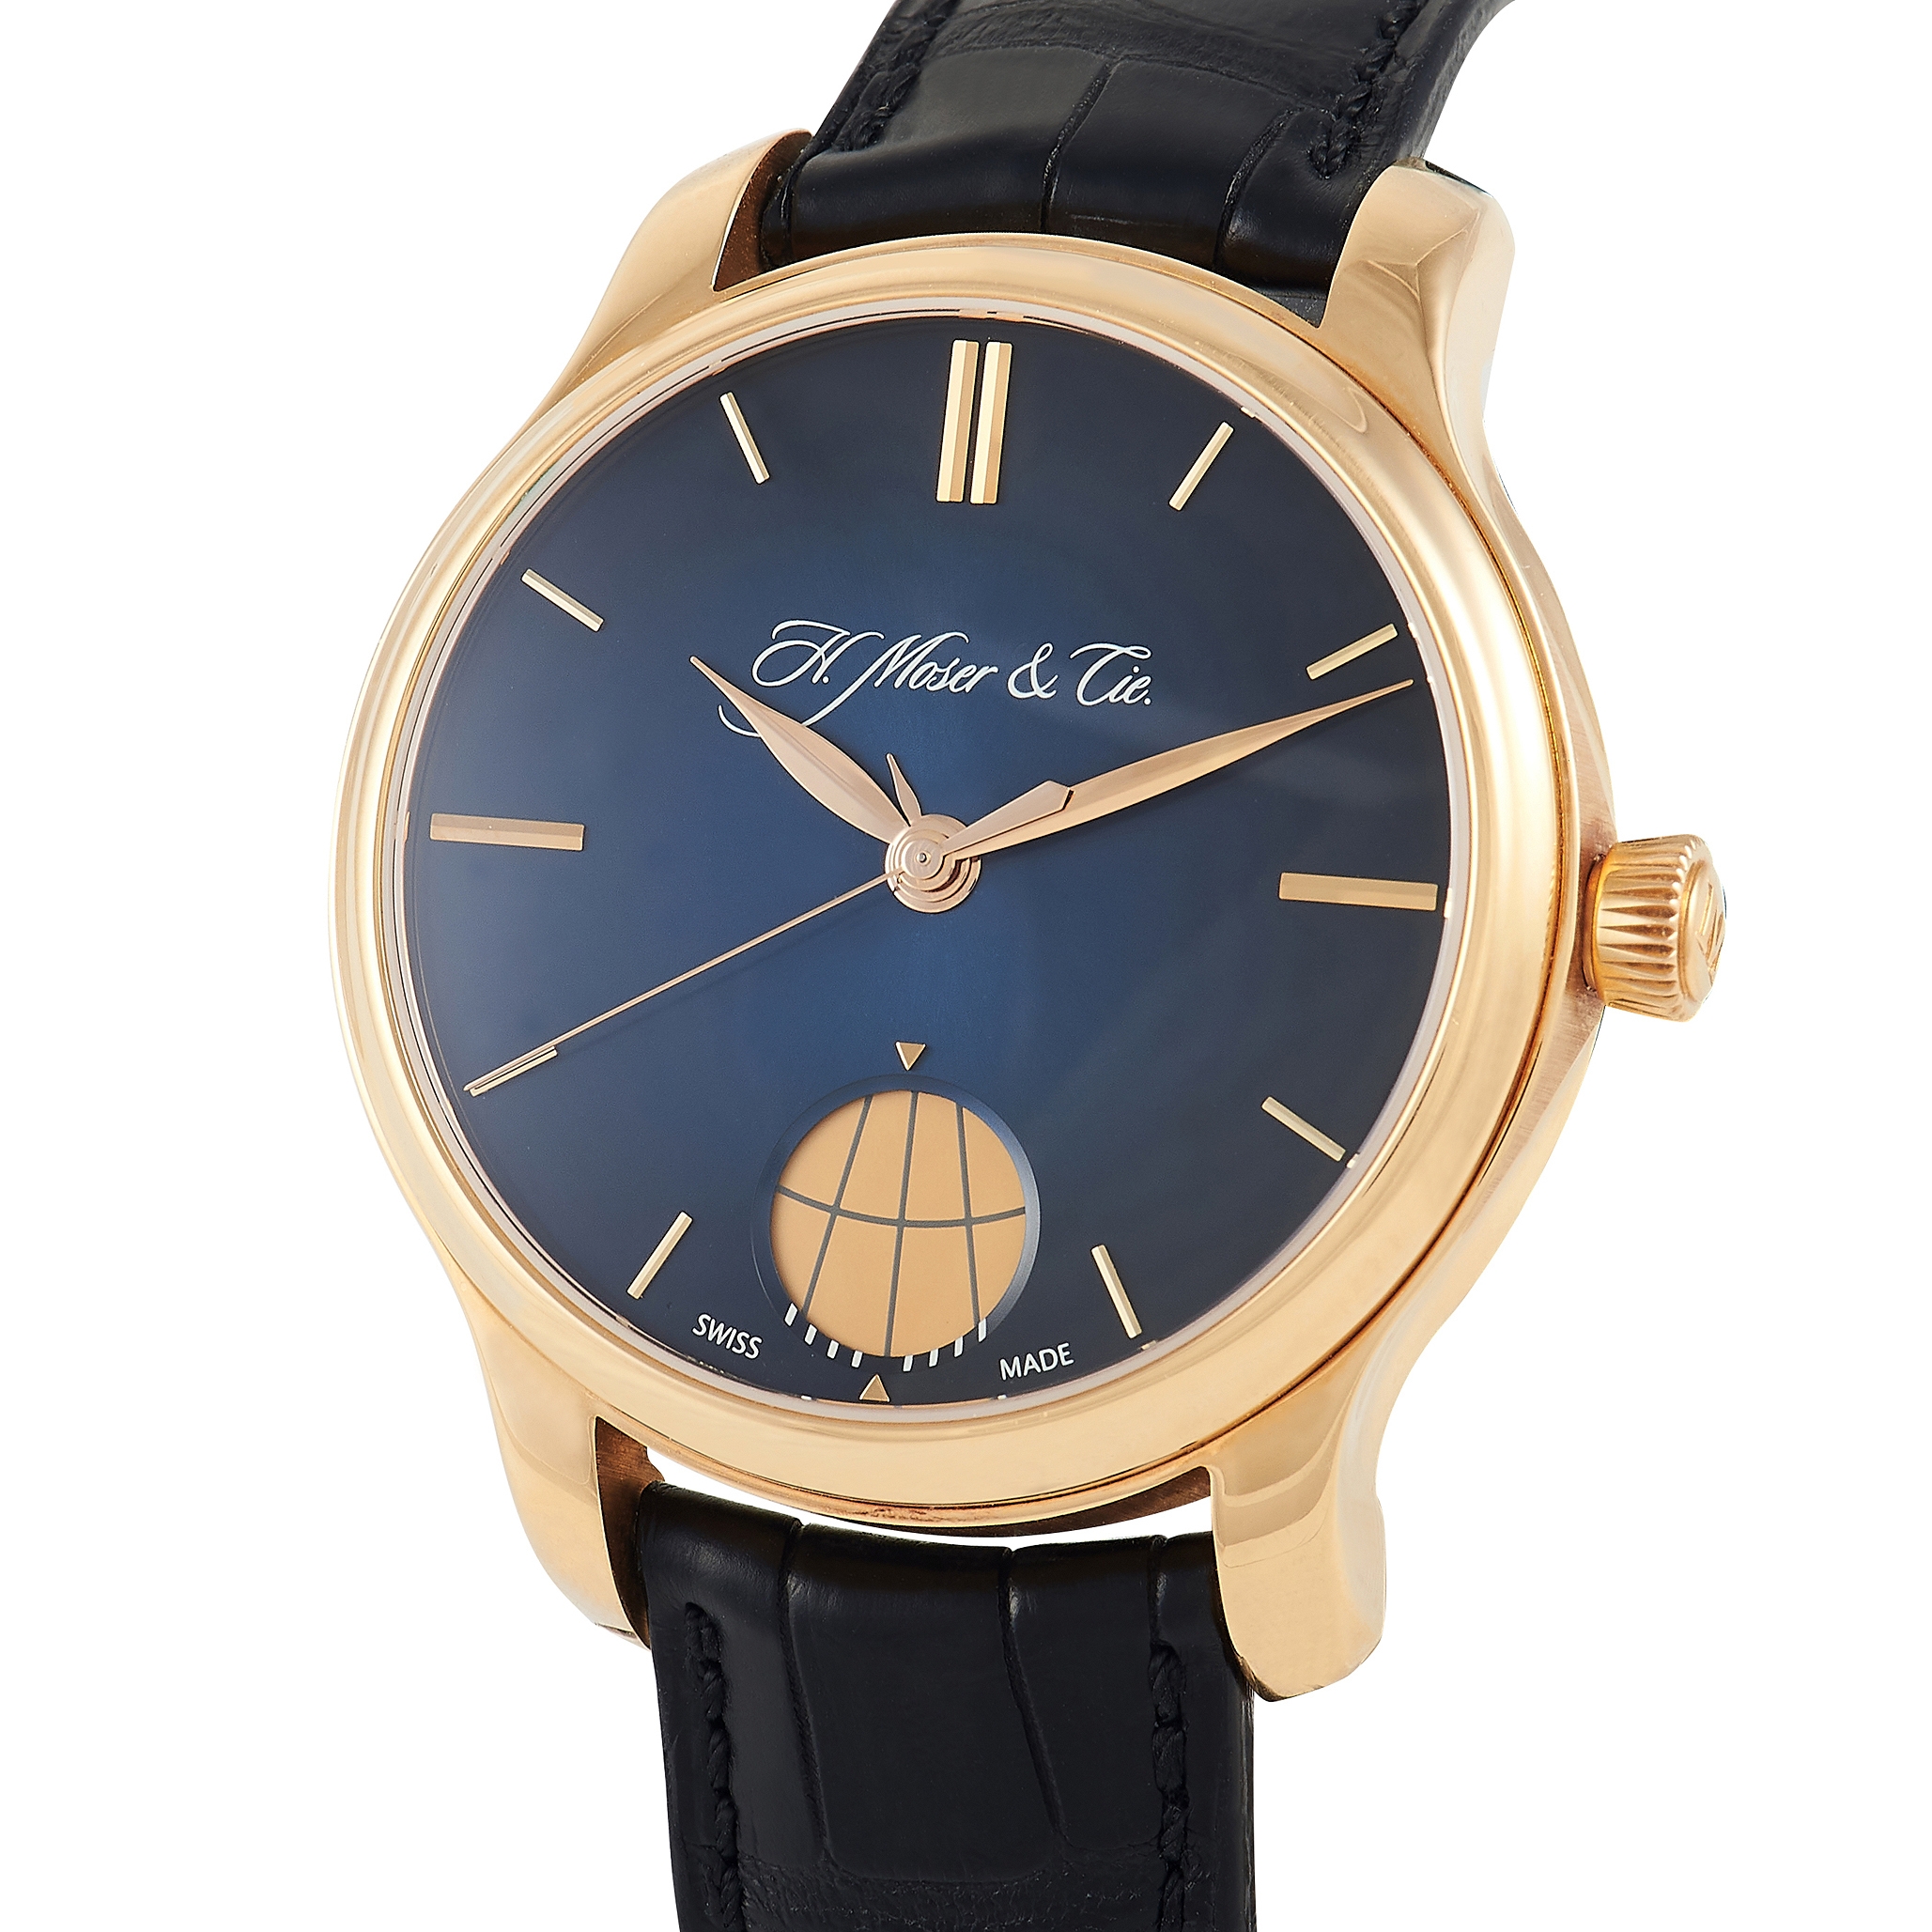 H. Moser & Cie Endeavour Moon 41mm Watch 1348-0100